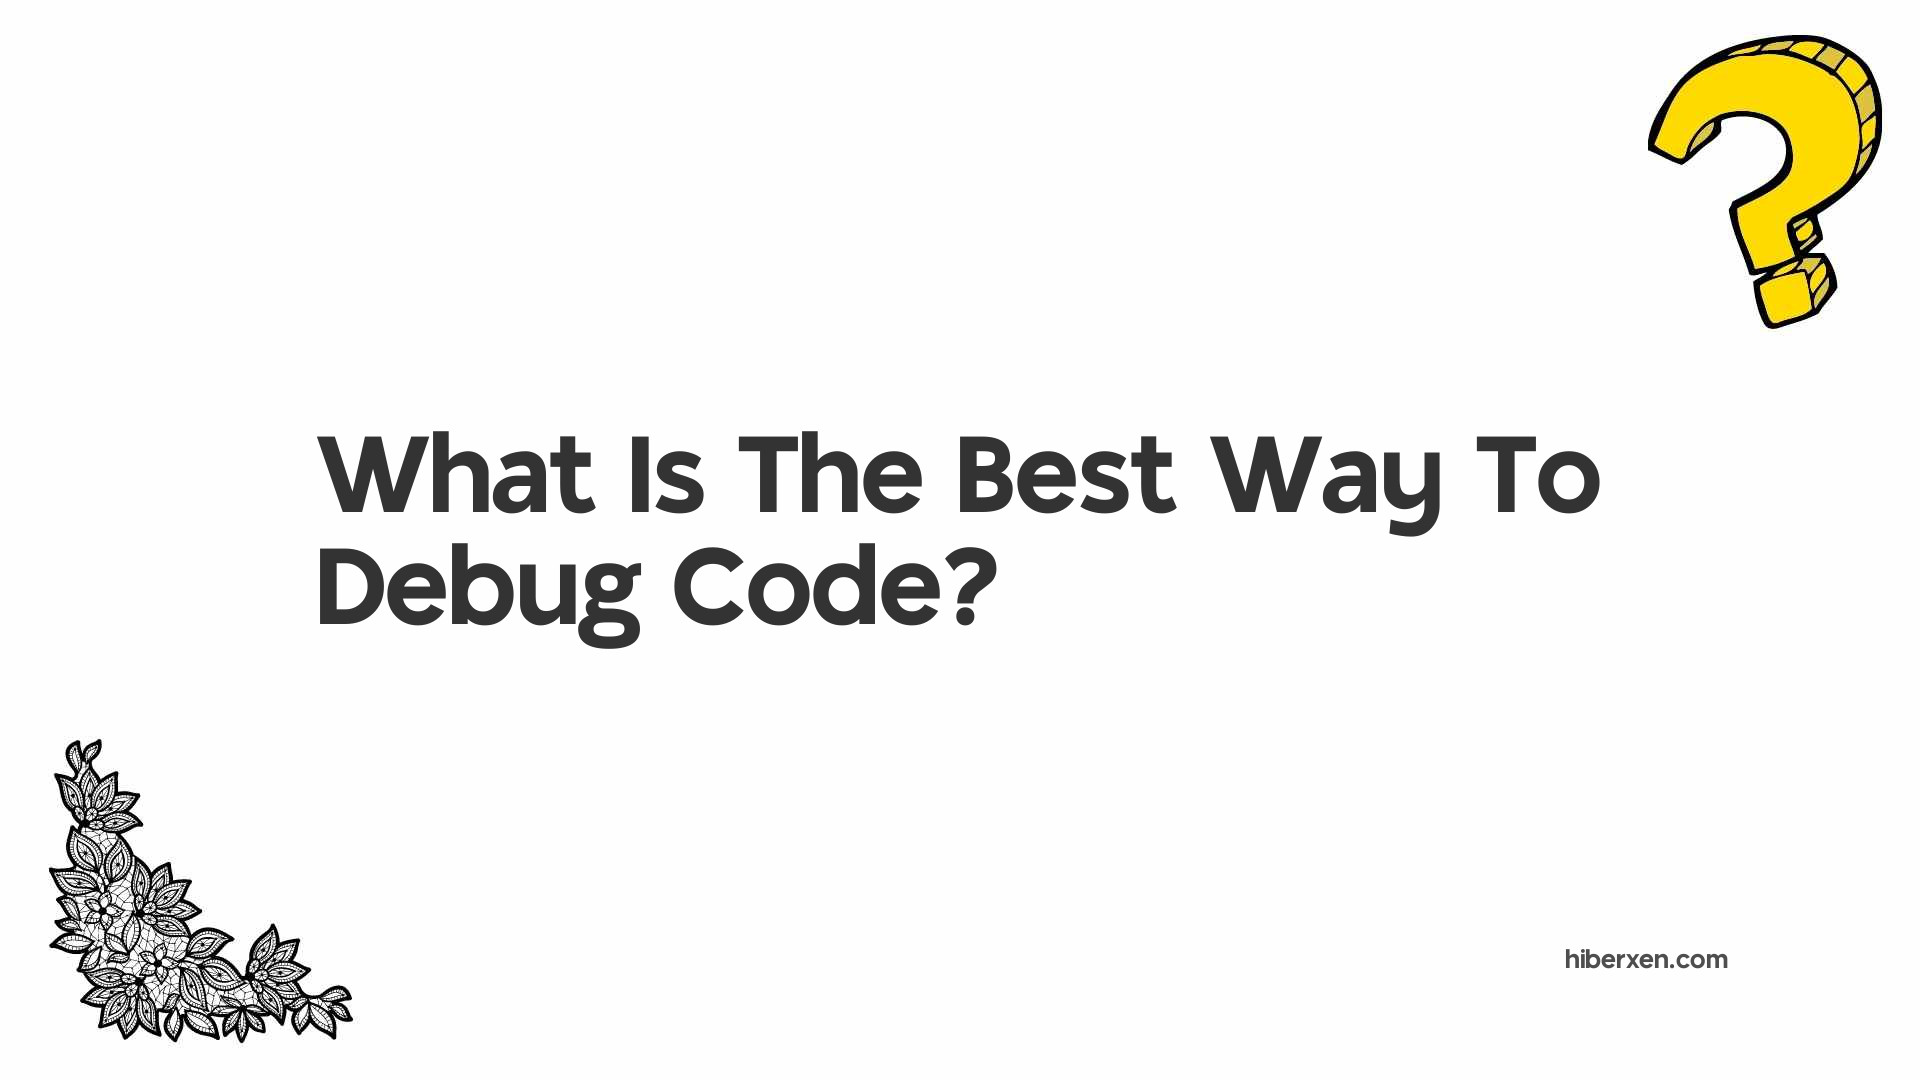 What Is The Best Way To Debug Code?